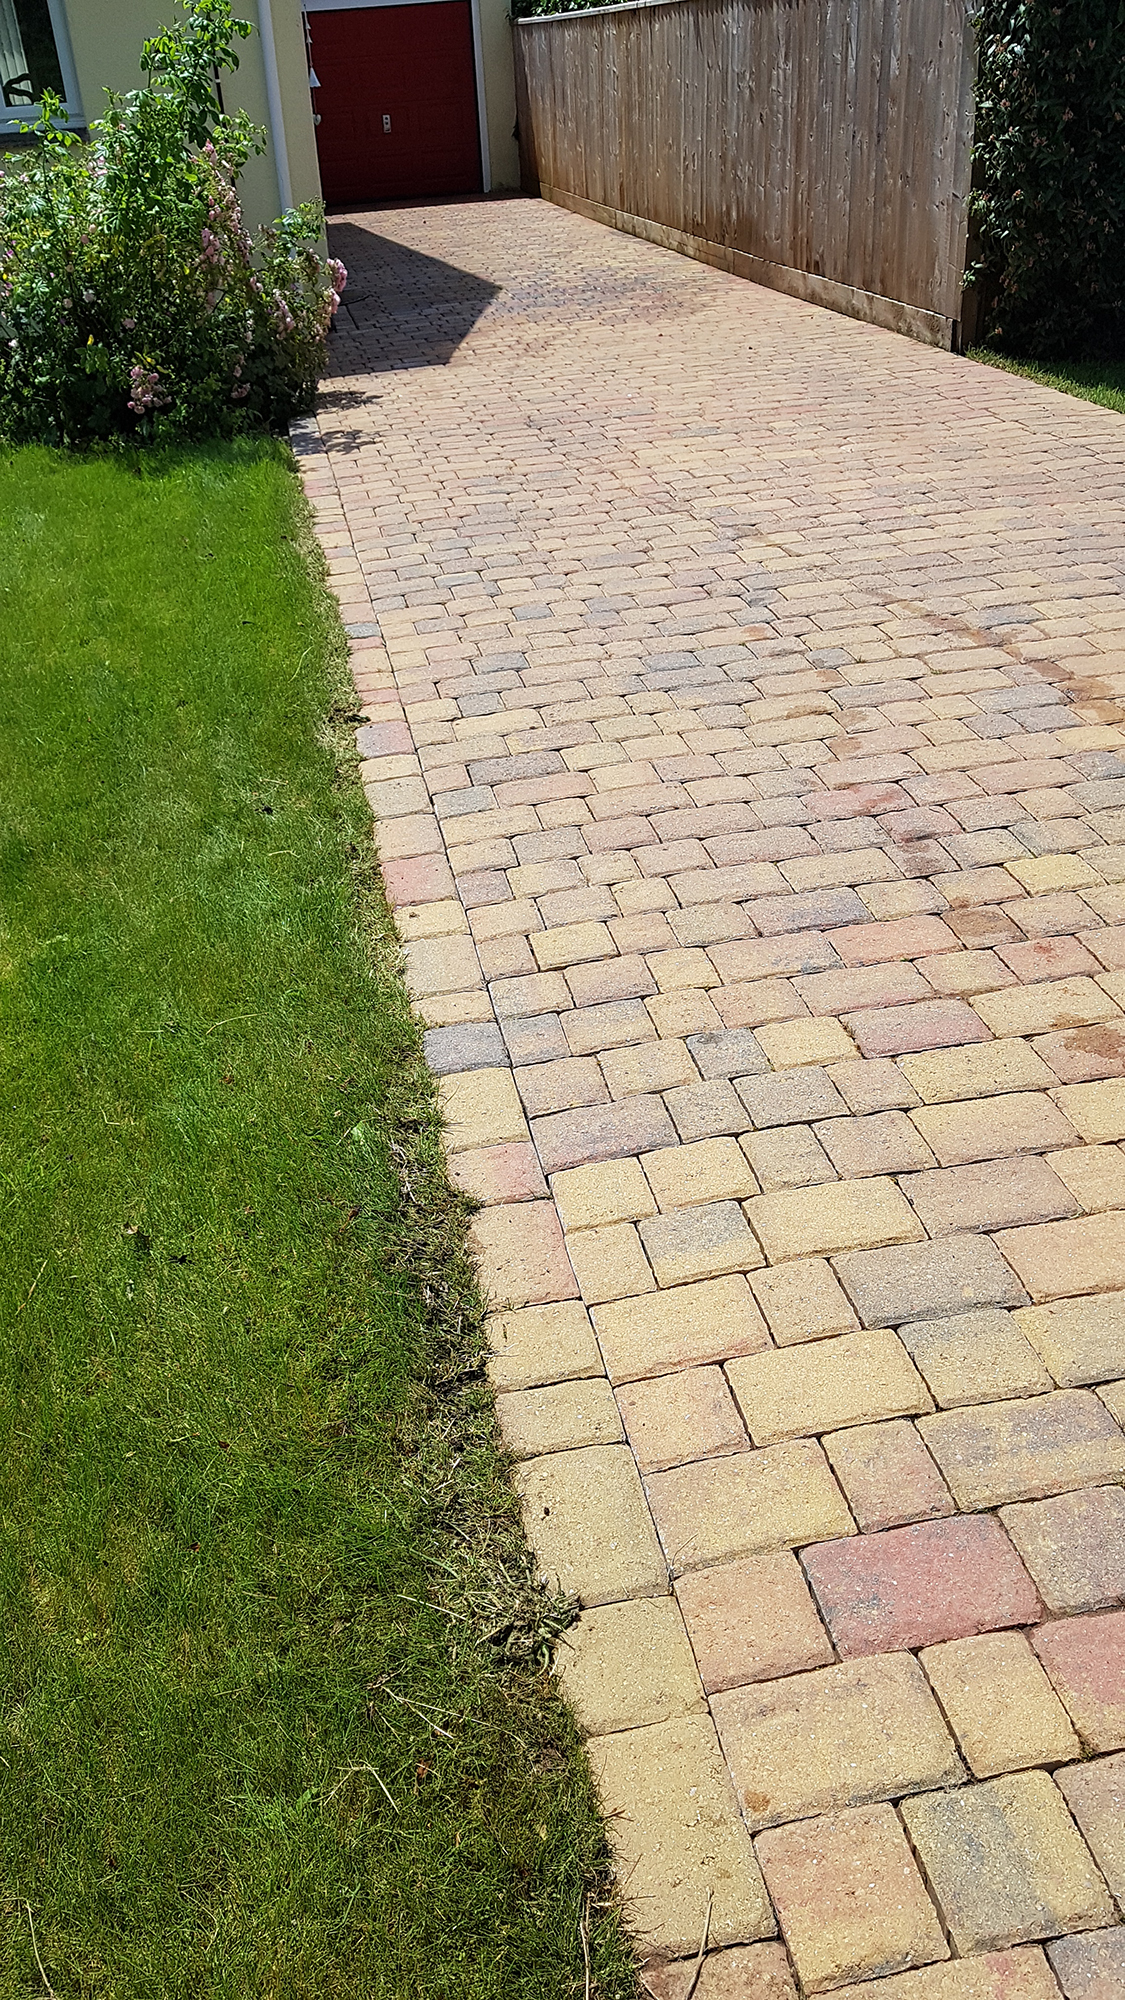 ABC Cleaning Services - Power Washing